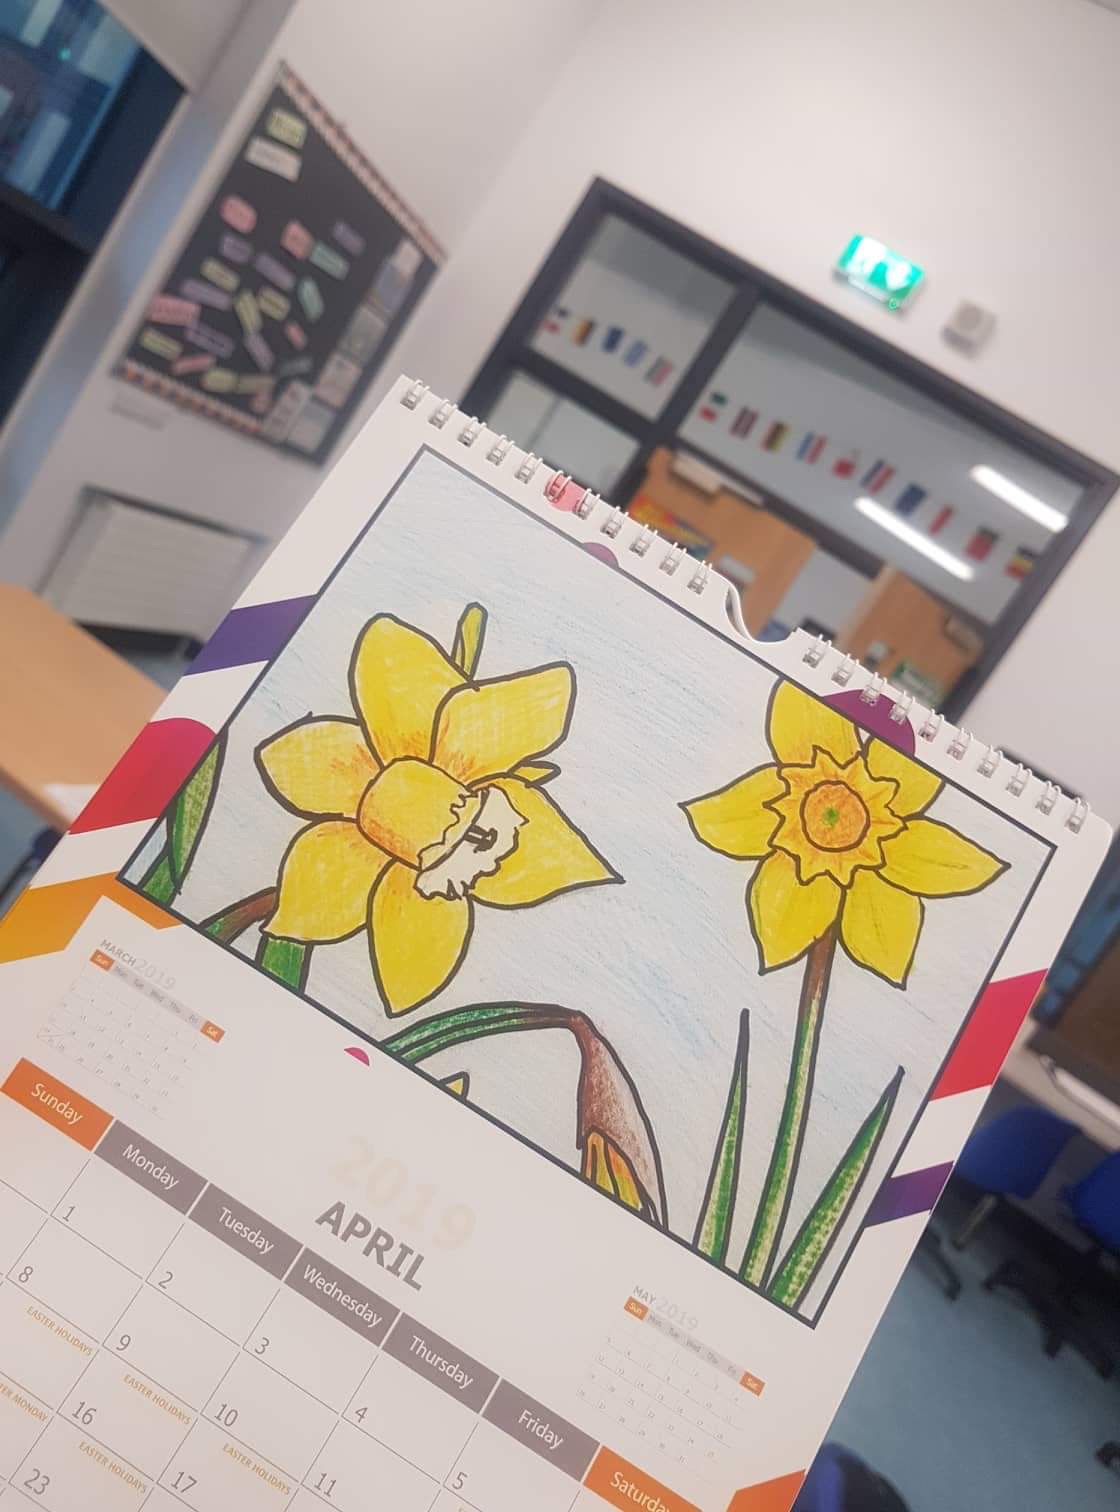 Images from the school calendar